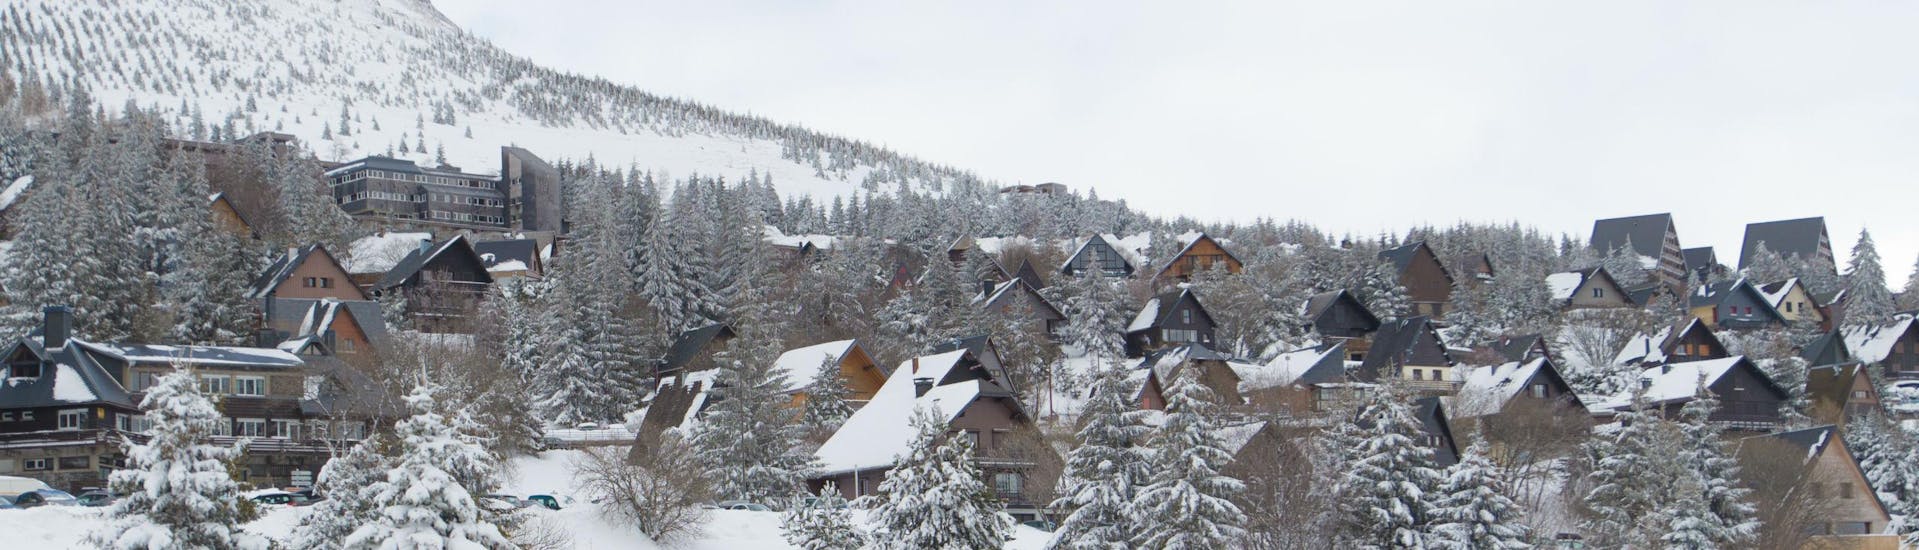 A view of the picturesque village of Besse - Super Besse, a French ski resort where visitors can book ski lessons with the local ski schools.